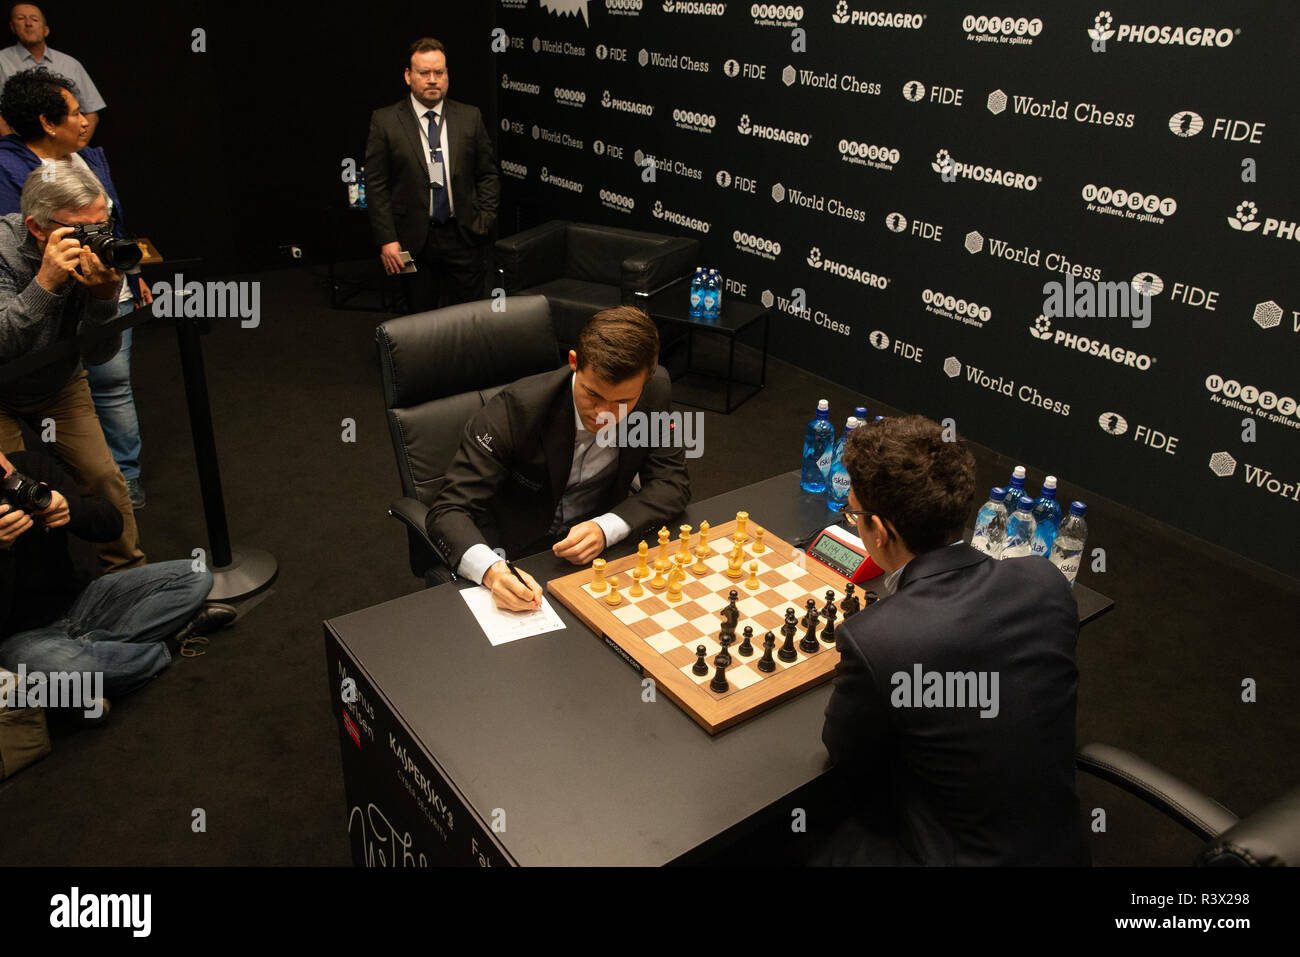 Chess: Carlsen loses two classical games in a row for the first time since  2015, Magnus Carlsen